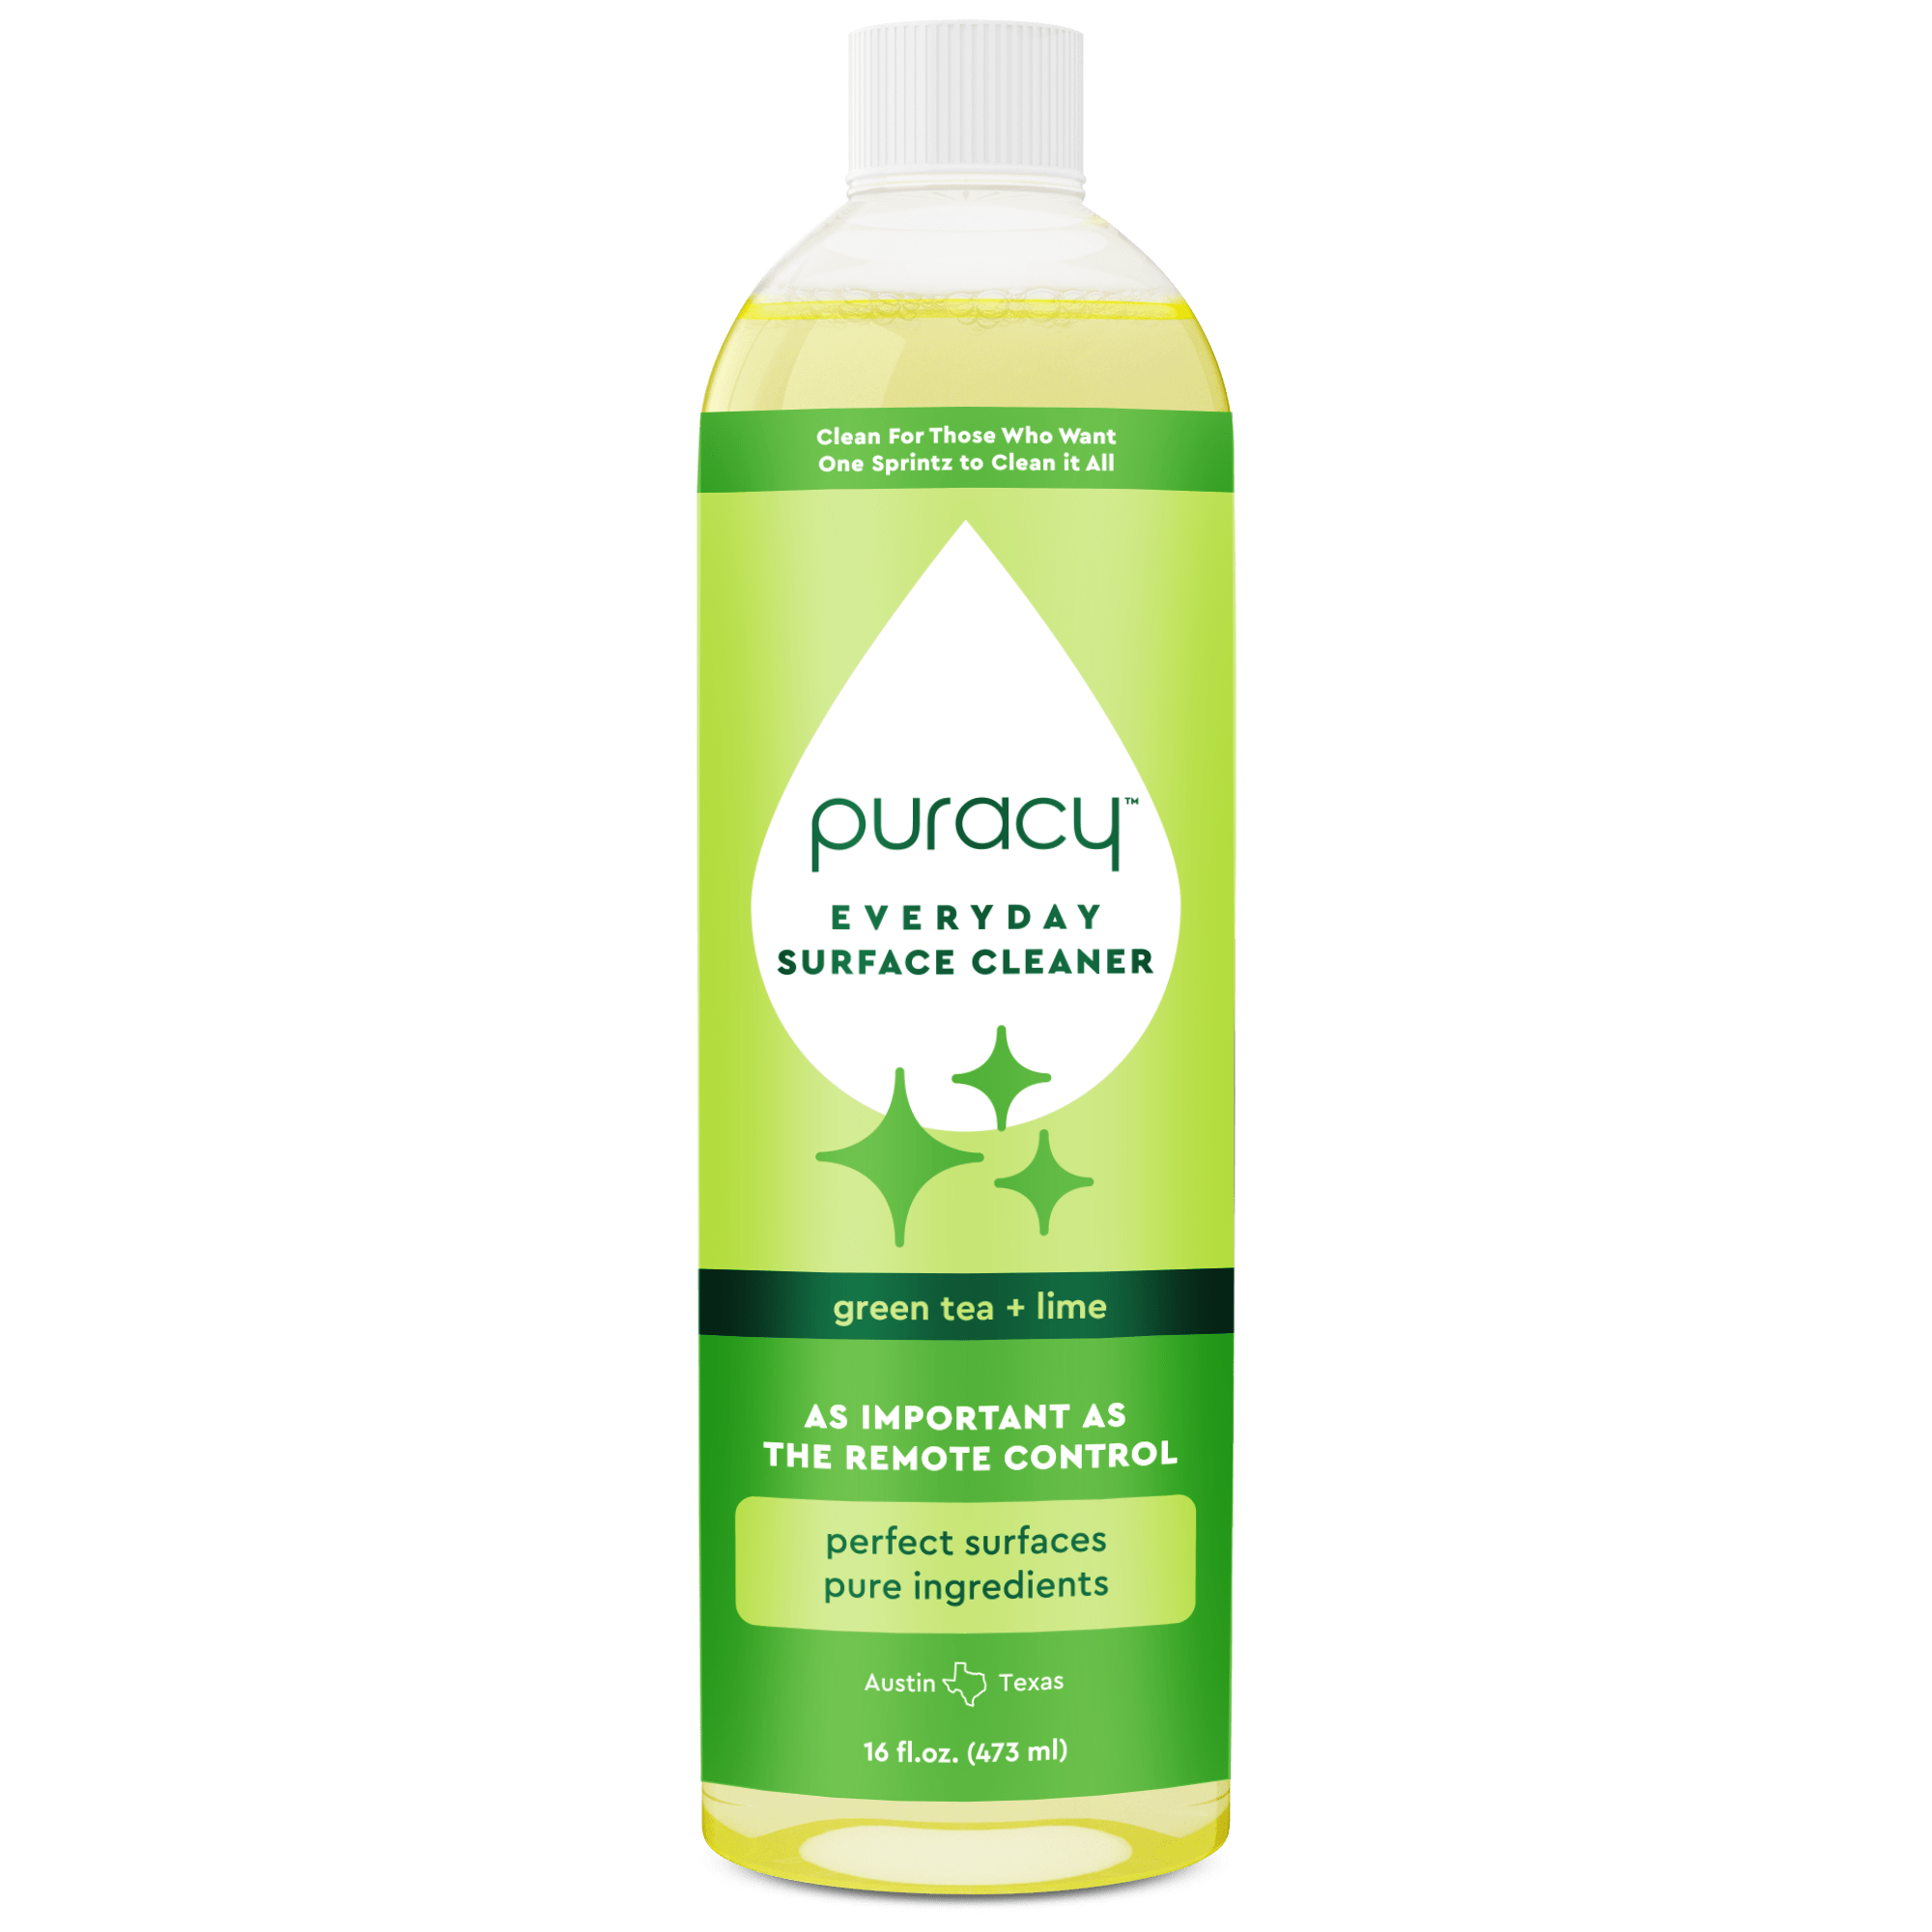 One Clean Eco-Friendly Kitchen Cleaner - 1 Gallon Bottle 